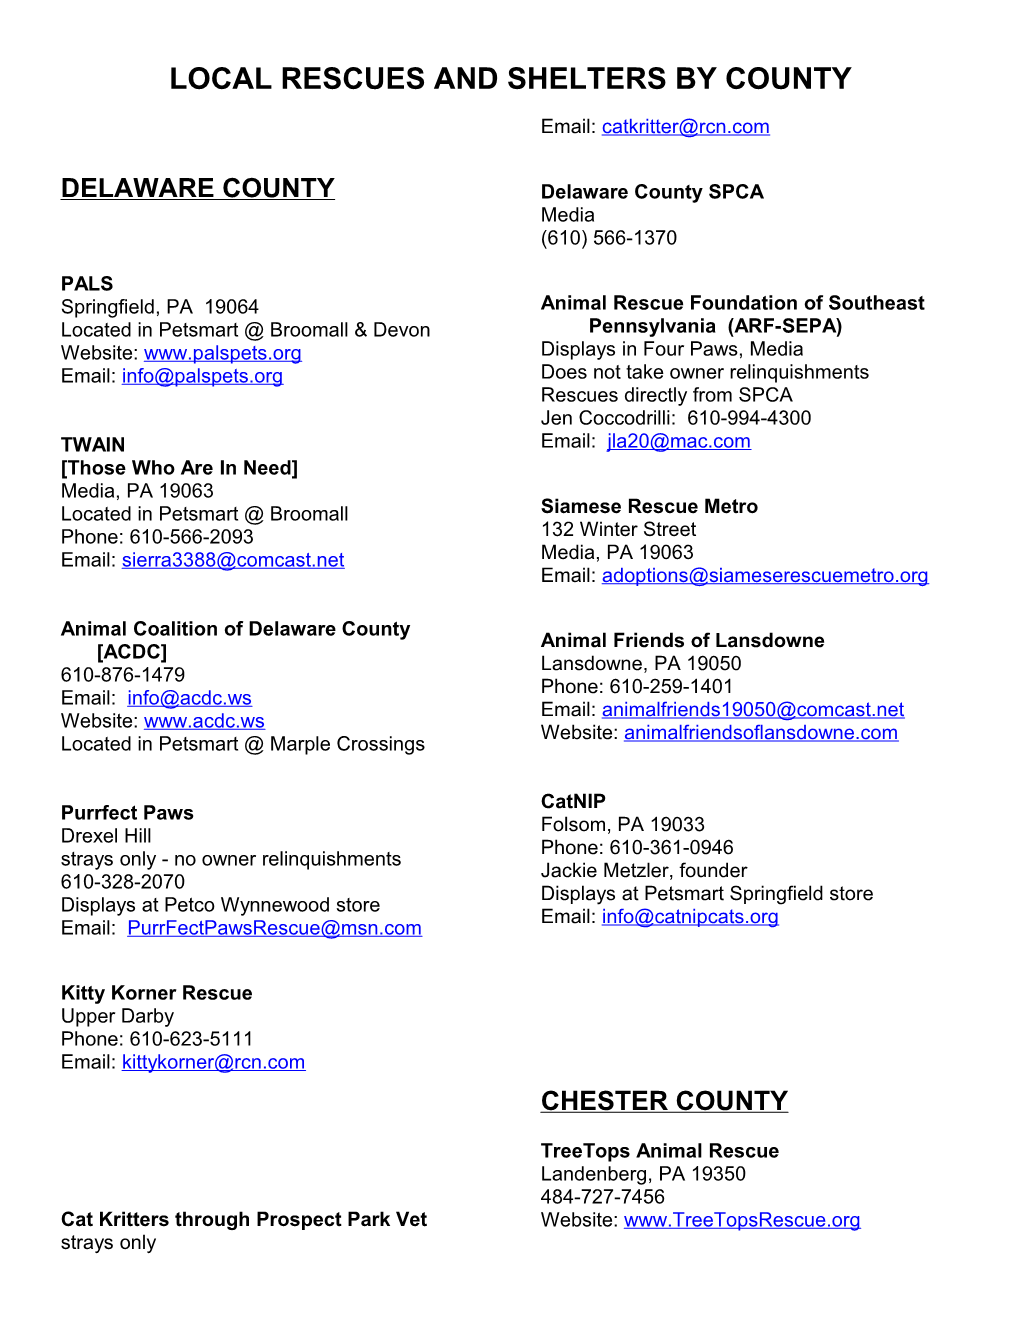 Local Rescues and Shelters by County